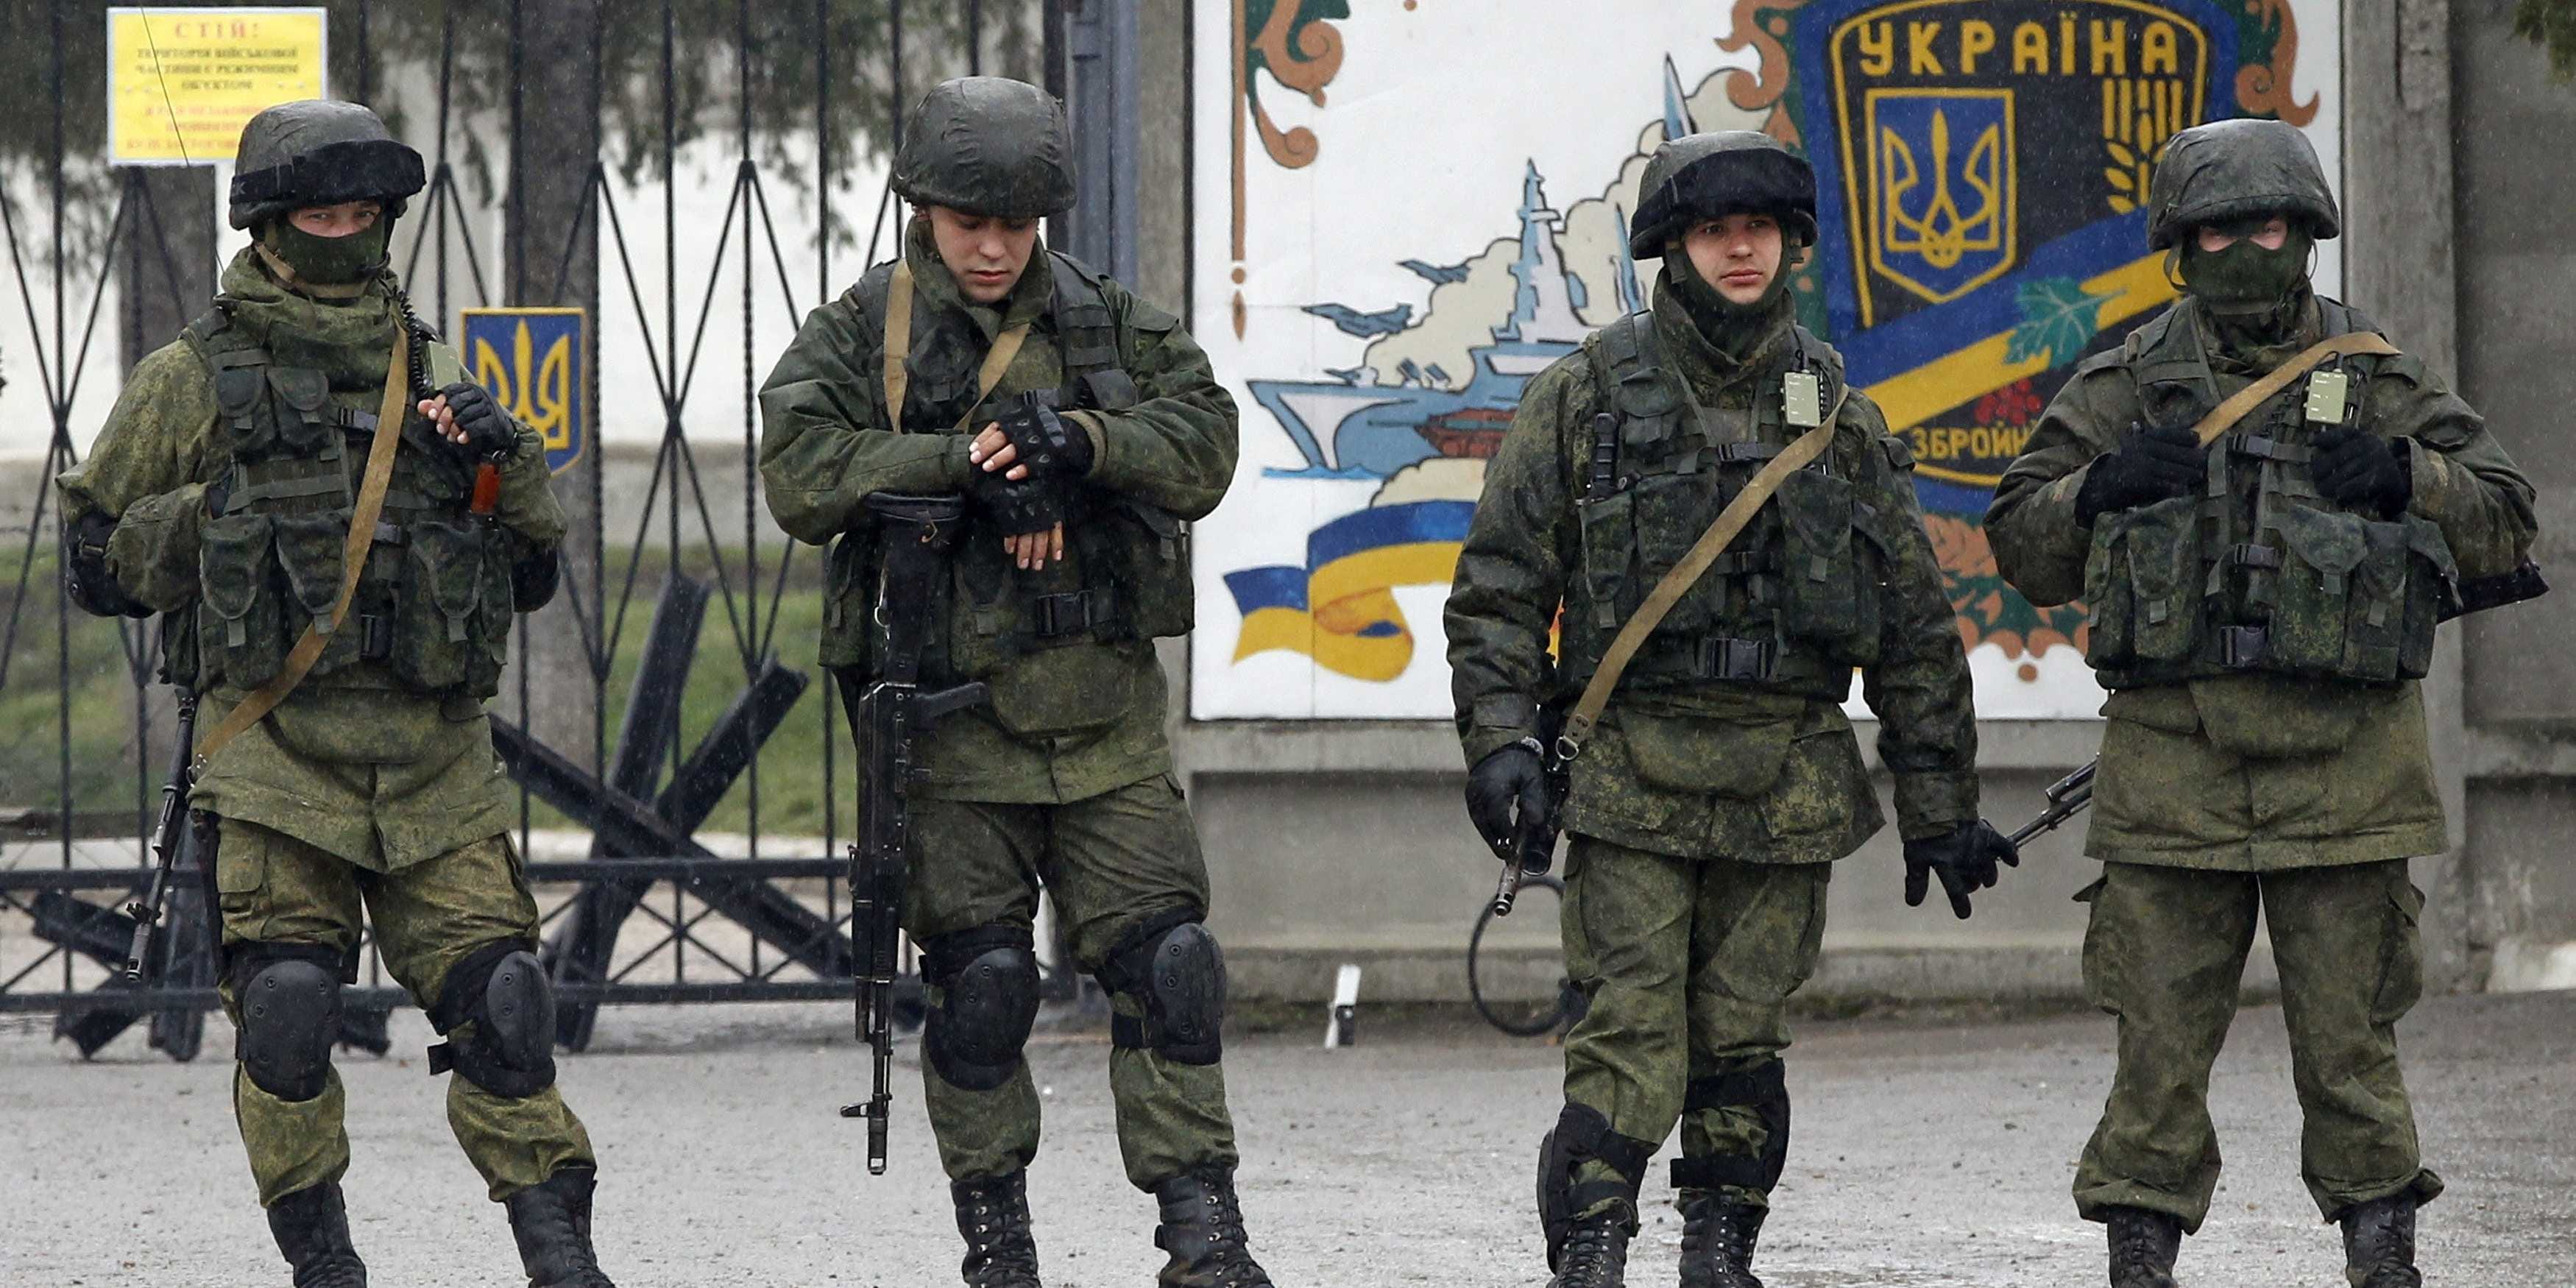 ukraine-says-russian-troops-in-crimea-have-doubled-to-30000.jpg